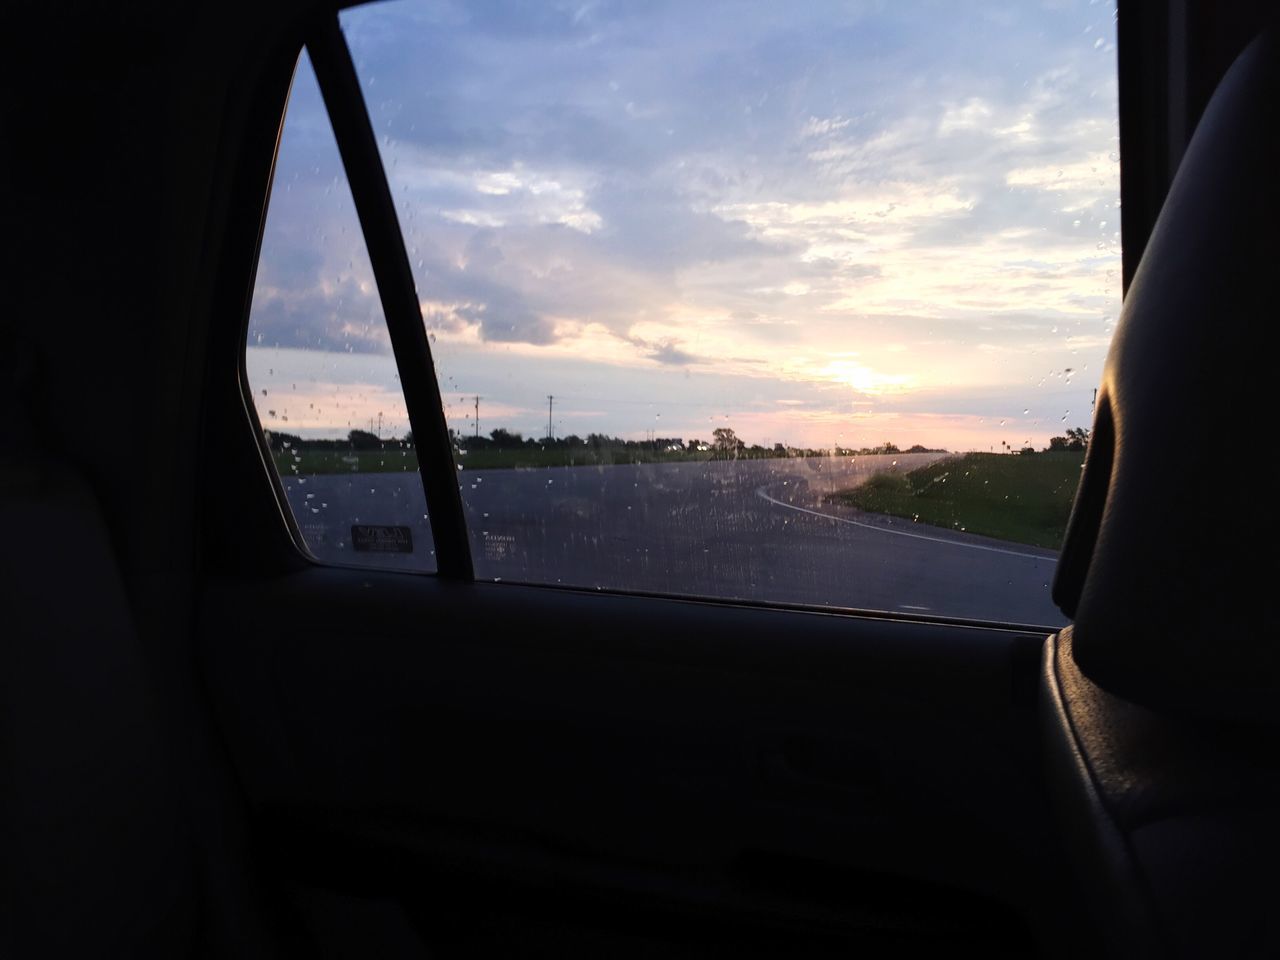 window, sky, transportation, indoors, sunset, mode of transport, cloud, transparent, glass - material, looking through window, cloud - sky, vehicle interior, dark, cloudy, cloudscape, nature, journey, no people, vehicle